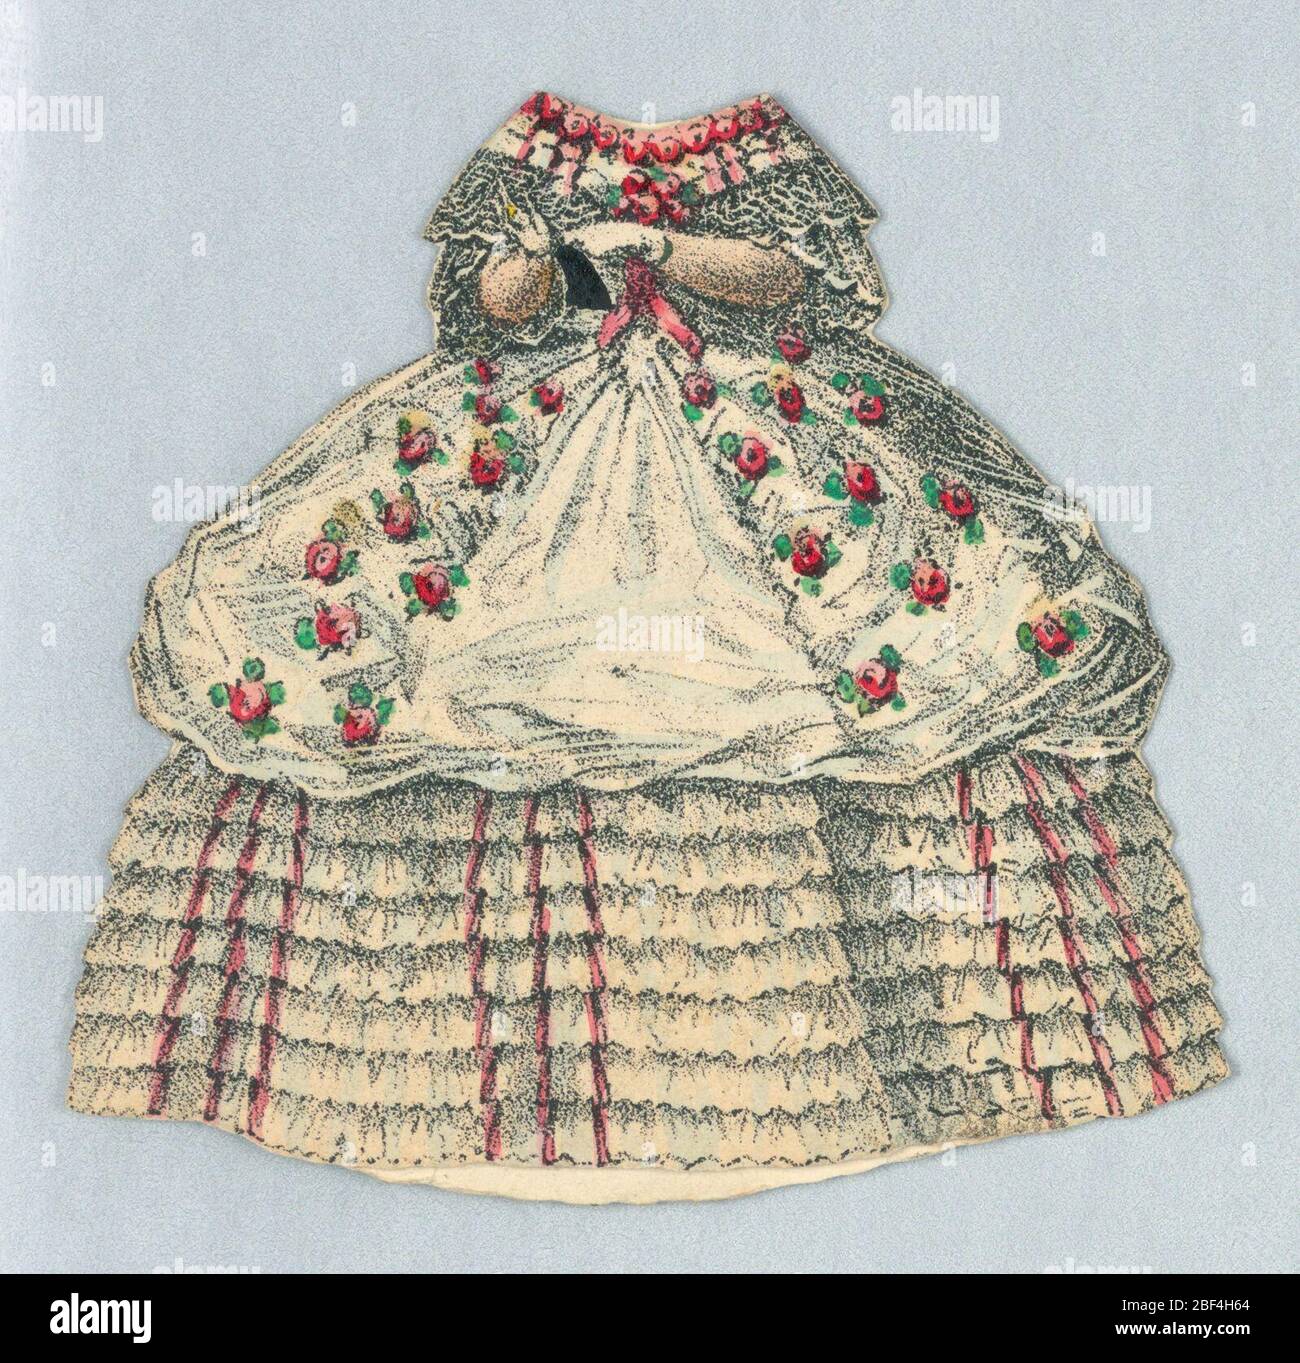 Paper Doll Costume in White with Red Roses. White dress lined with red roses at the neckline and roses on the upper portion of her dress. White lace sleeves, and many small layers of white ruffle also adorn the dress. Both back and front of dress depicted. Stock Photo